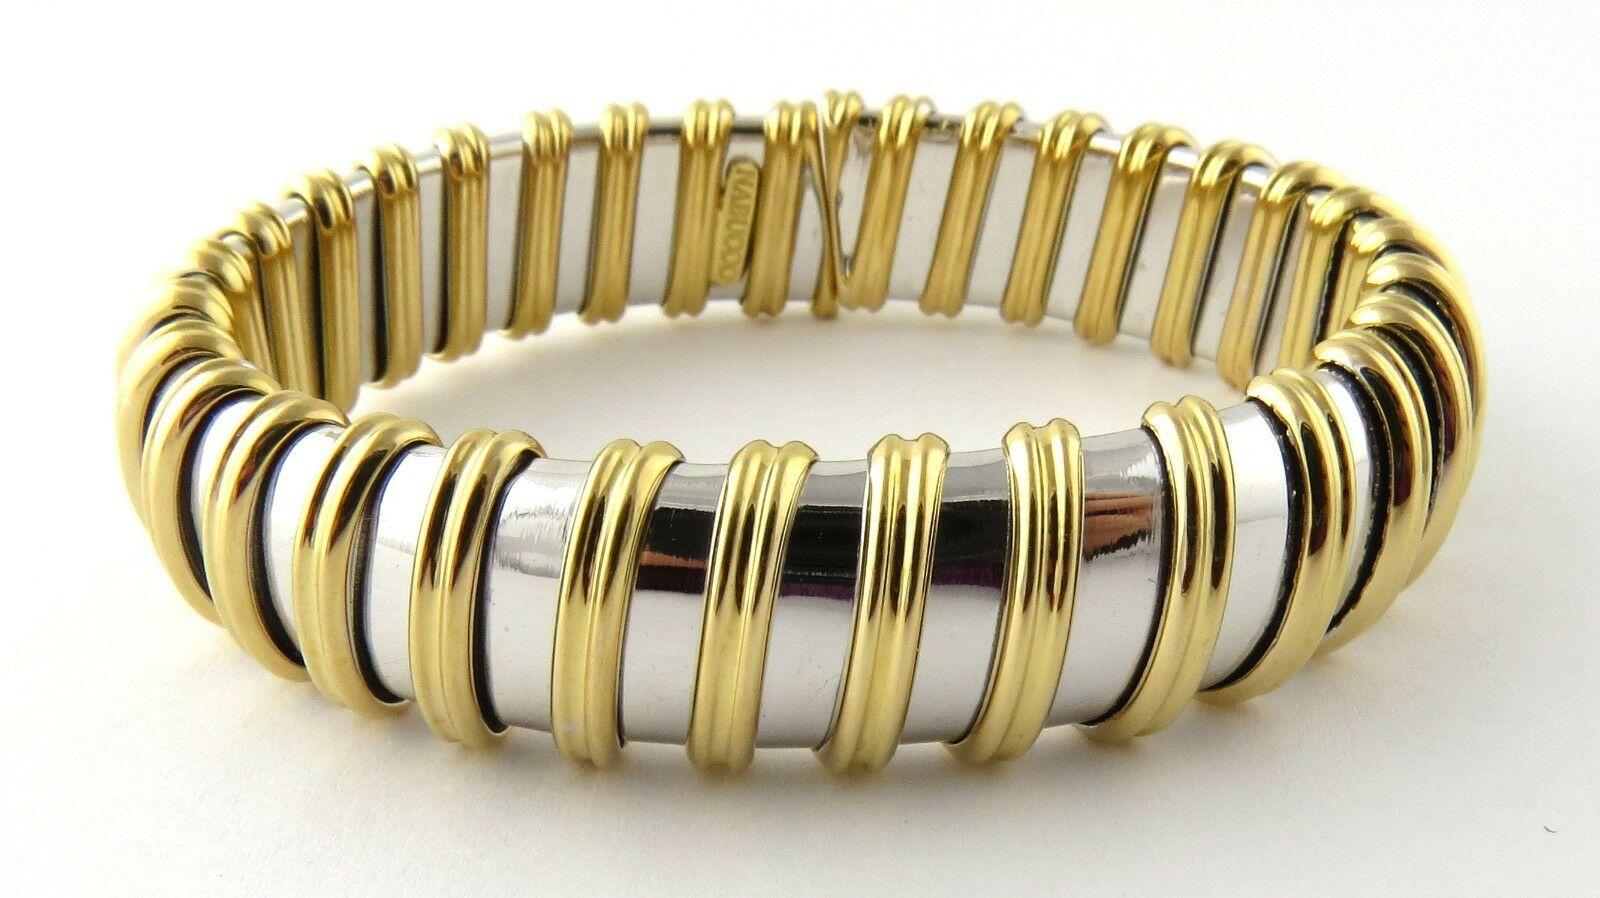 Roberto Coin Nabucco 18K White and Yellow Gold Bangle Bracelet

This authentic Roberto Coin Nabucco bracelet is stamped Nabucco 18K *1226VI Italy

This bracelet is approx. 6.5 